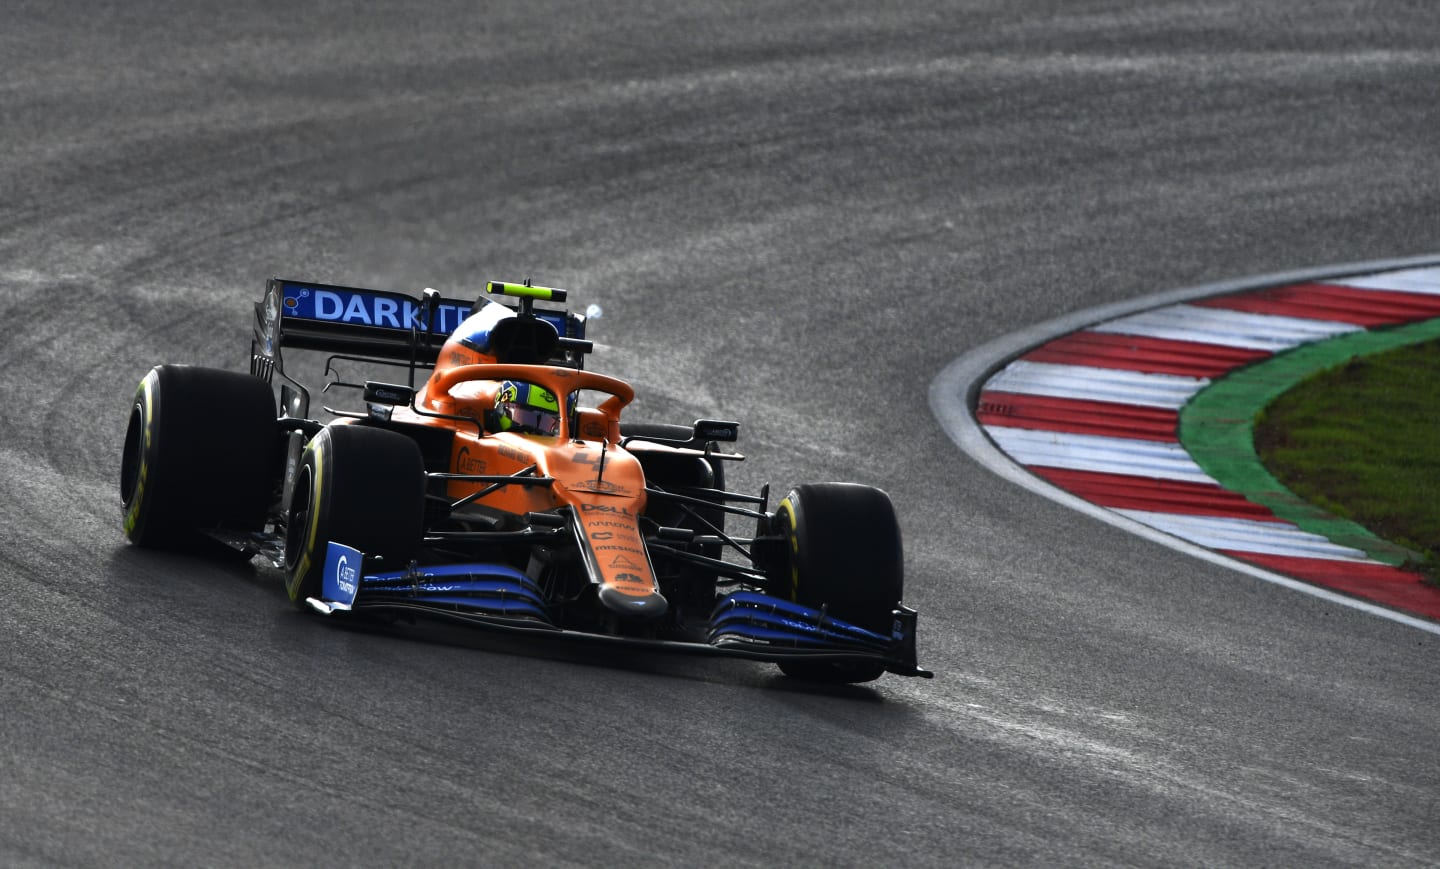 ISTANBUL, TURKEY - NOVEMBER 13: Lando Norris of Great Britain driving the (4) McLaren F1 Team MCL35 Renault on track during practice ahead of the F1 Grand Prix of Turkey at Intercity Istanbul Park on November 13, 2020 in Istanbul, Turkey. (Photo by Rudy Carezzevoli/Getty Images)